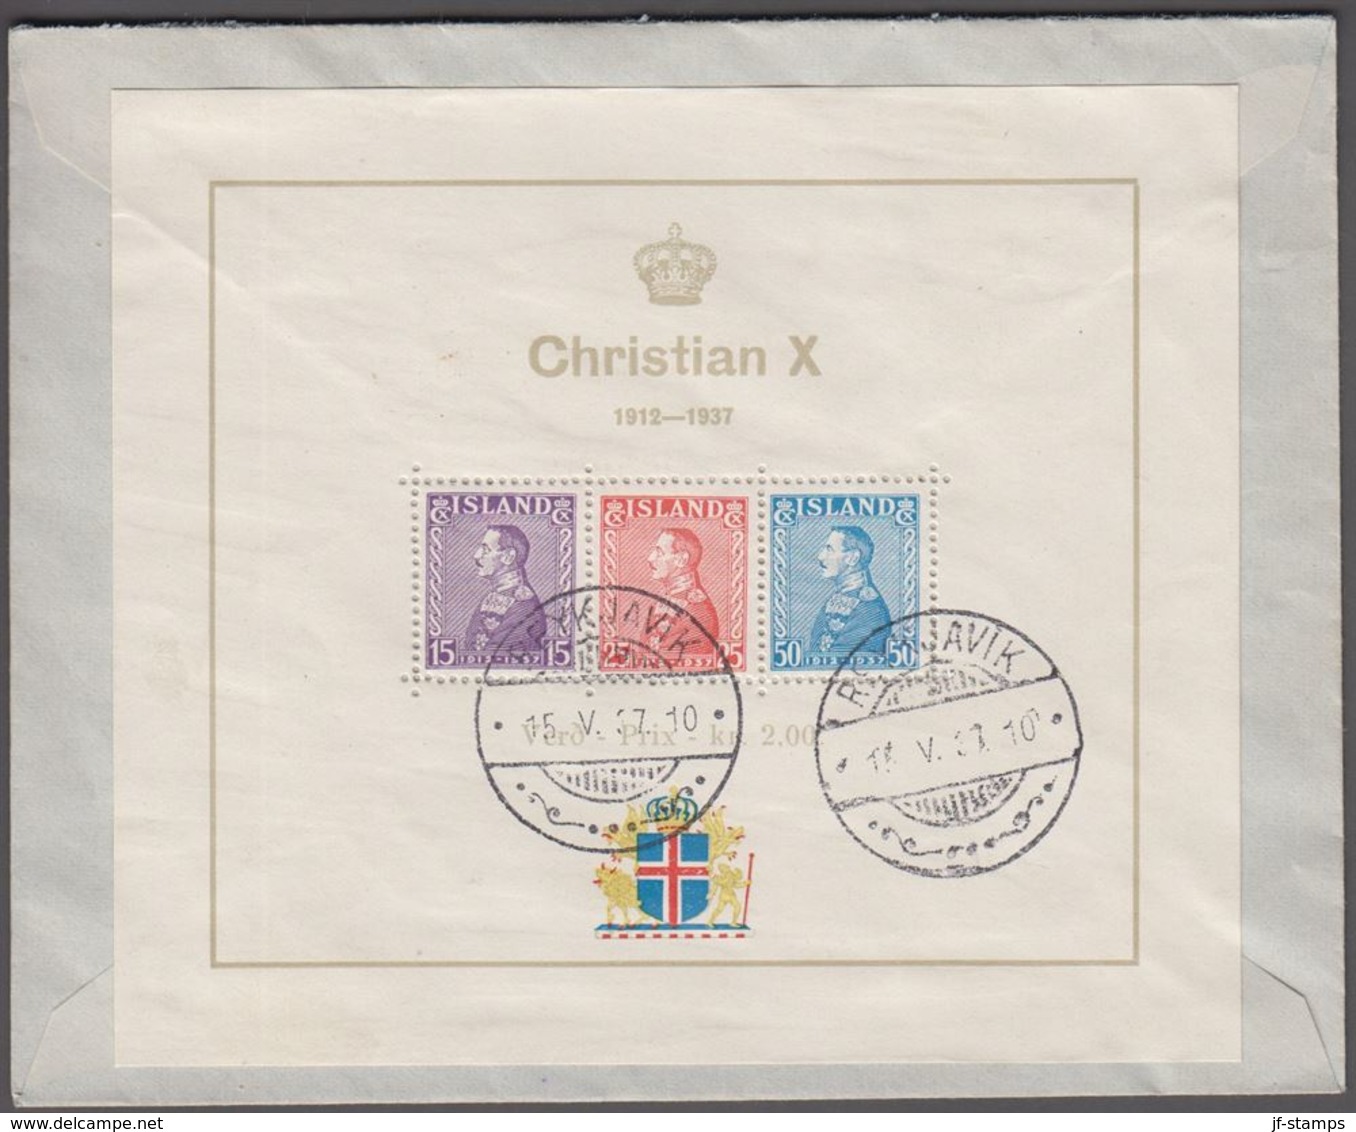 1937. Silver Jubilee Block Only 55.000 Issued. REYKJAVIK 15. V. 37. FDC Rare. (Michel 190-192 Bl. 1) - JF365076 - Lettres & Documents